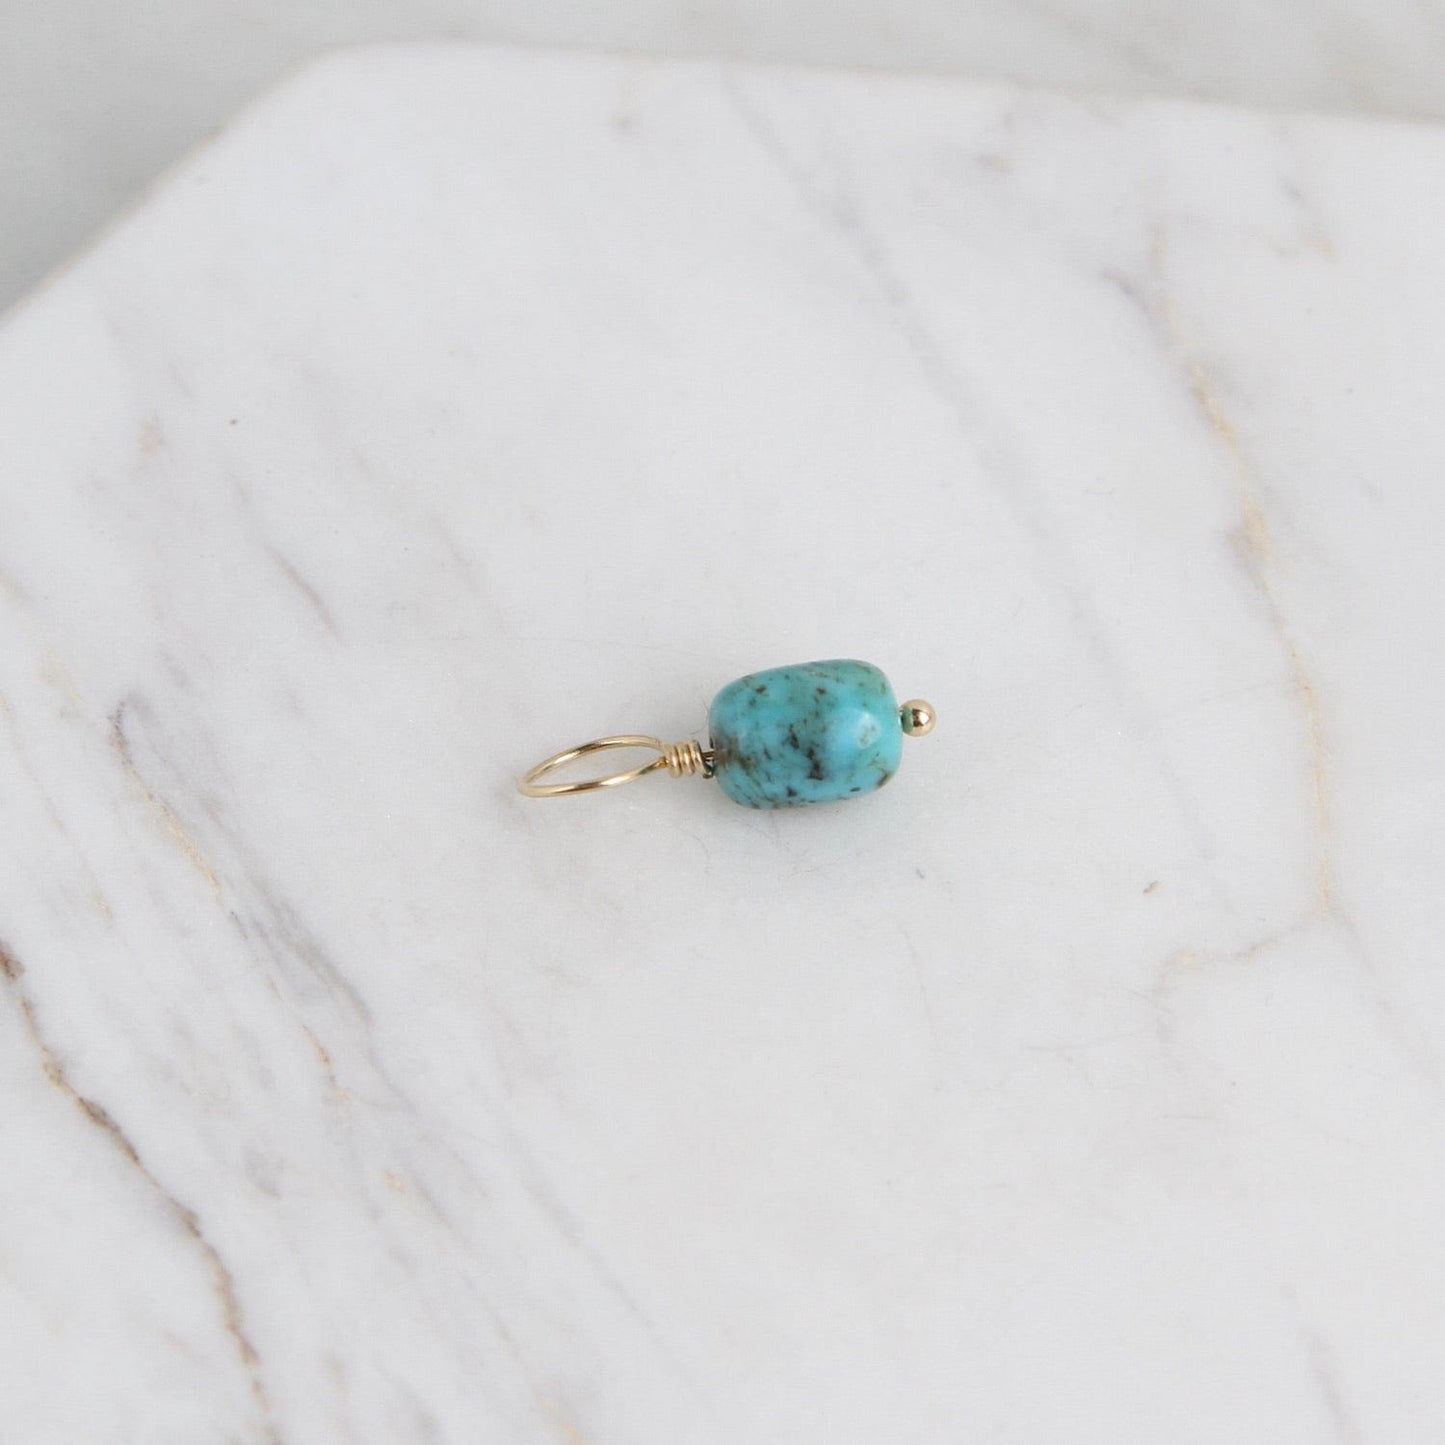 866 CHM Vein Turquoise  - Unfaceted Cylindar Gemstone Charm